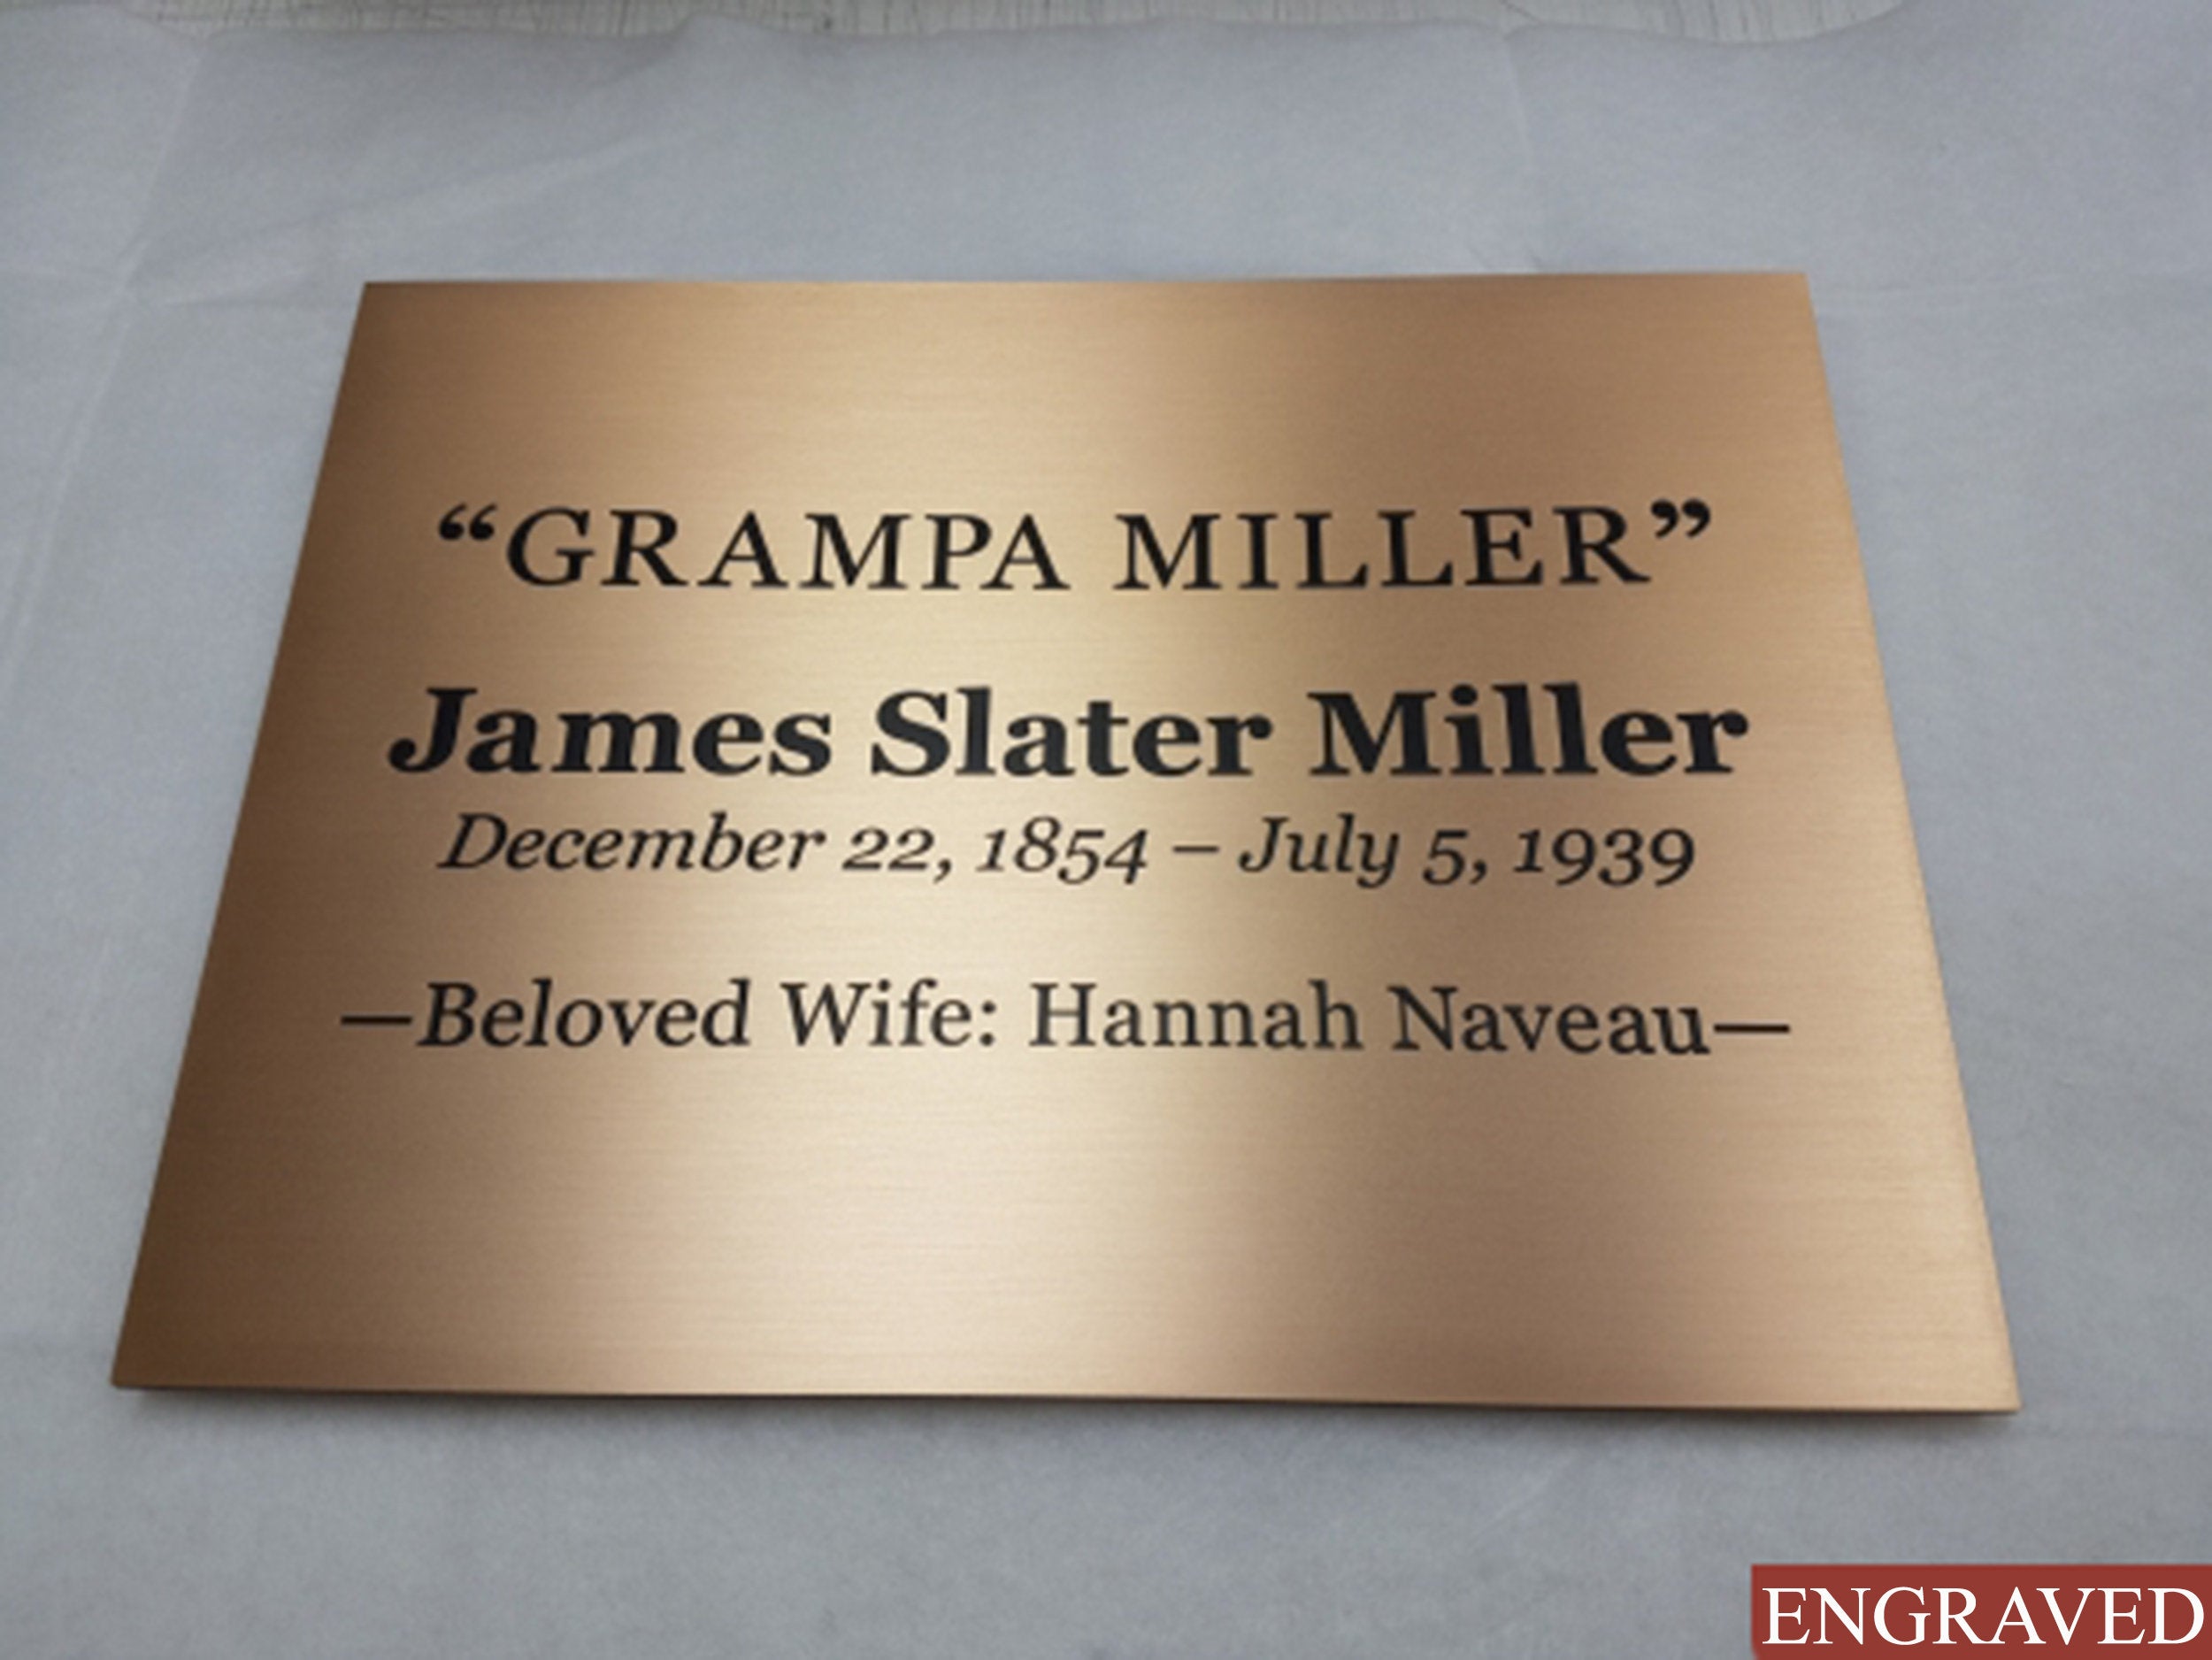 Personalized Engraved and Deep Etched Brass Signs Plaques PEBSP01